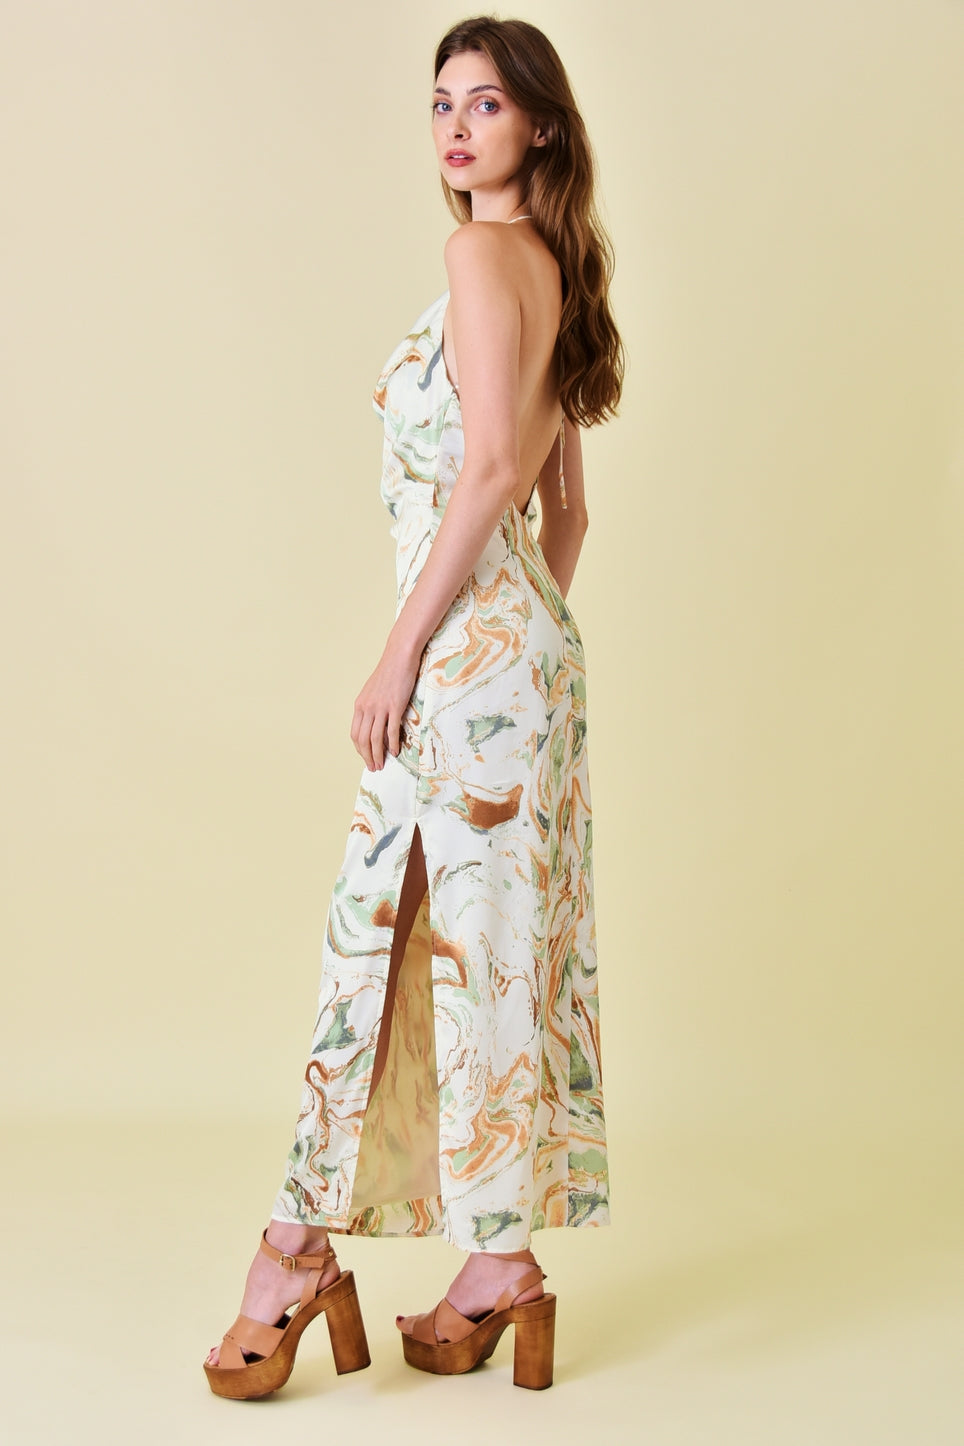 Fore Marble Print Halter Dress